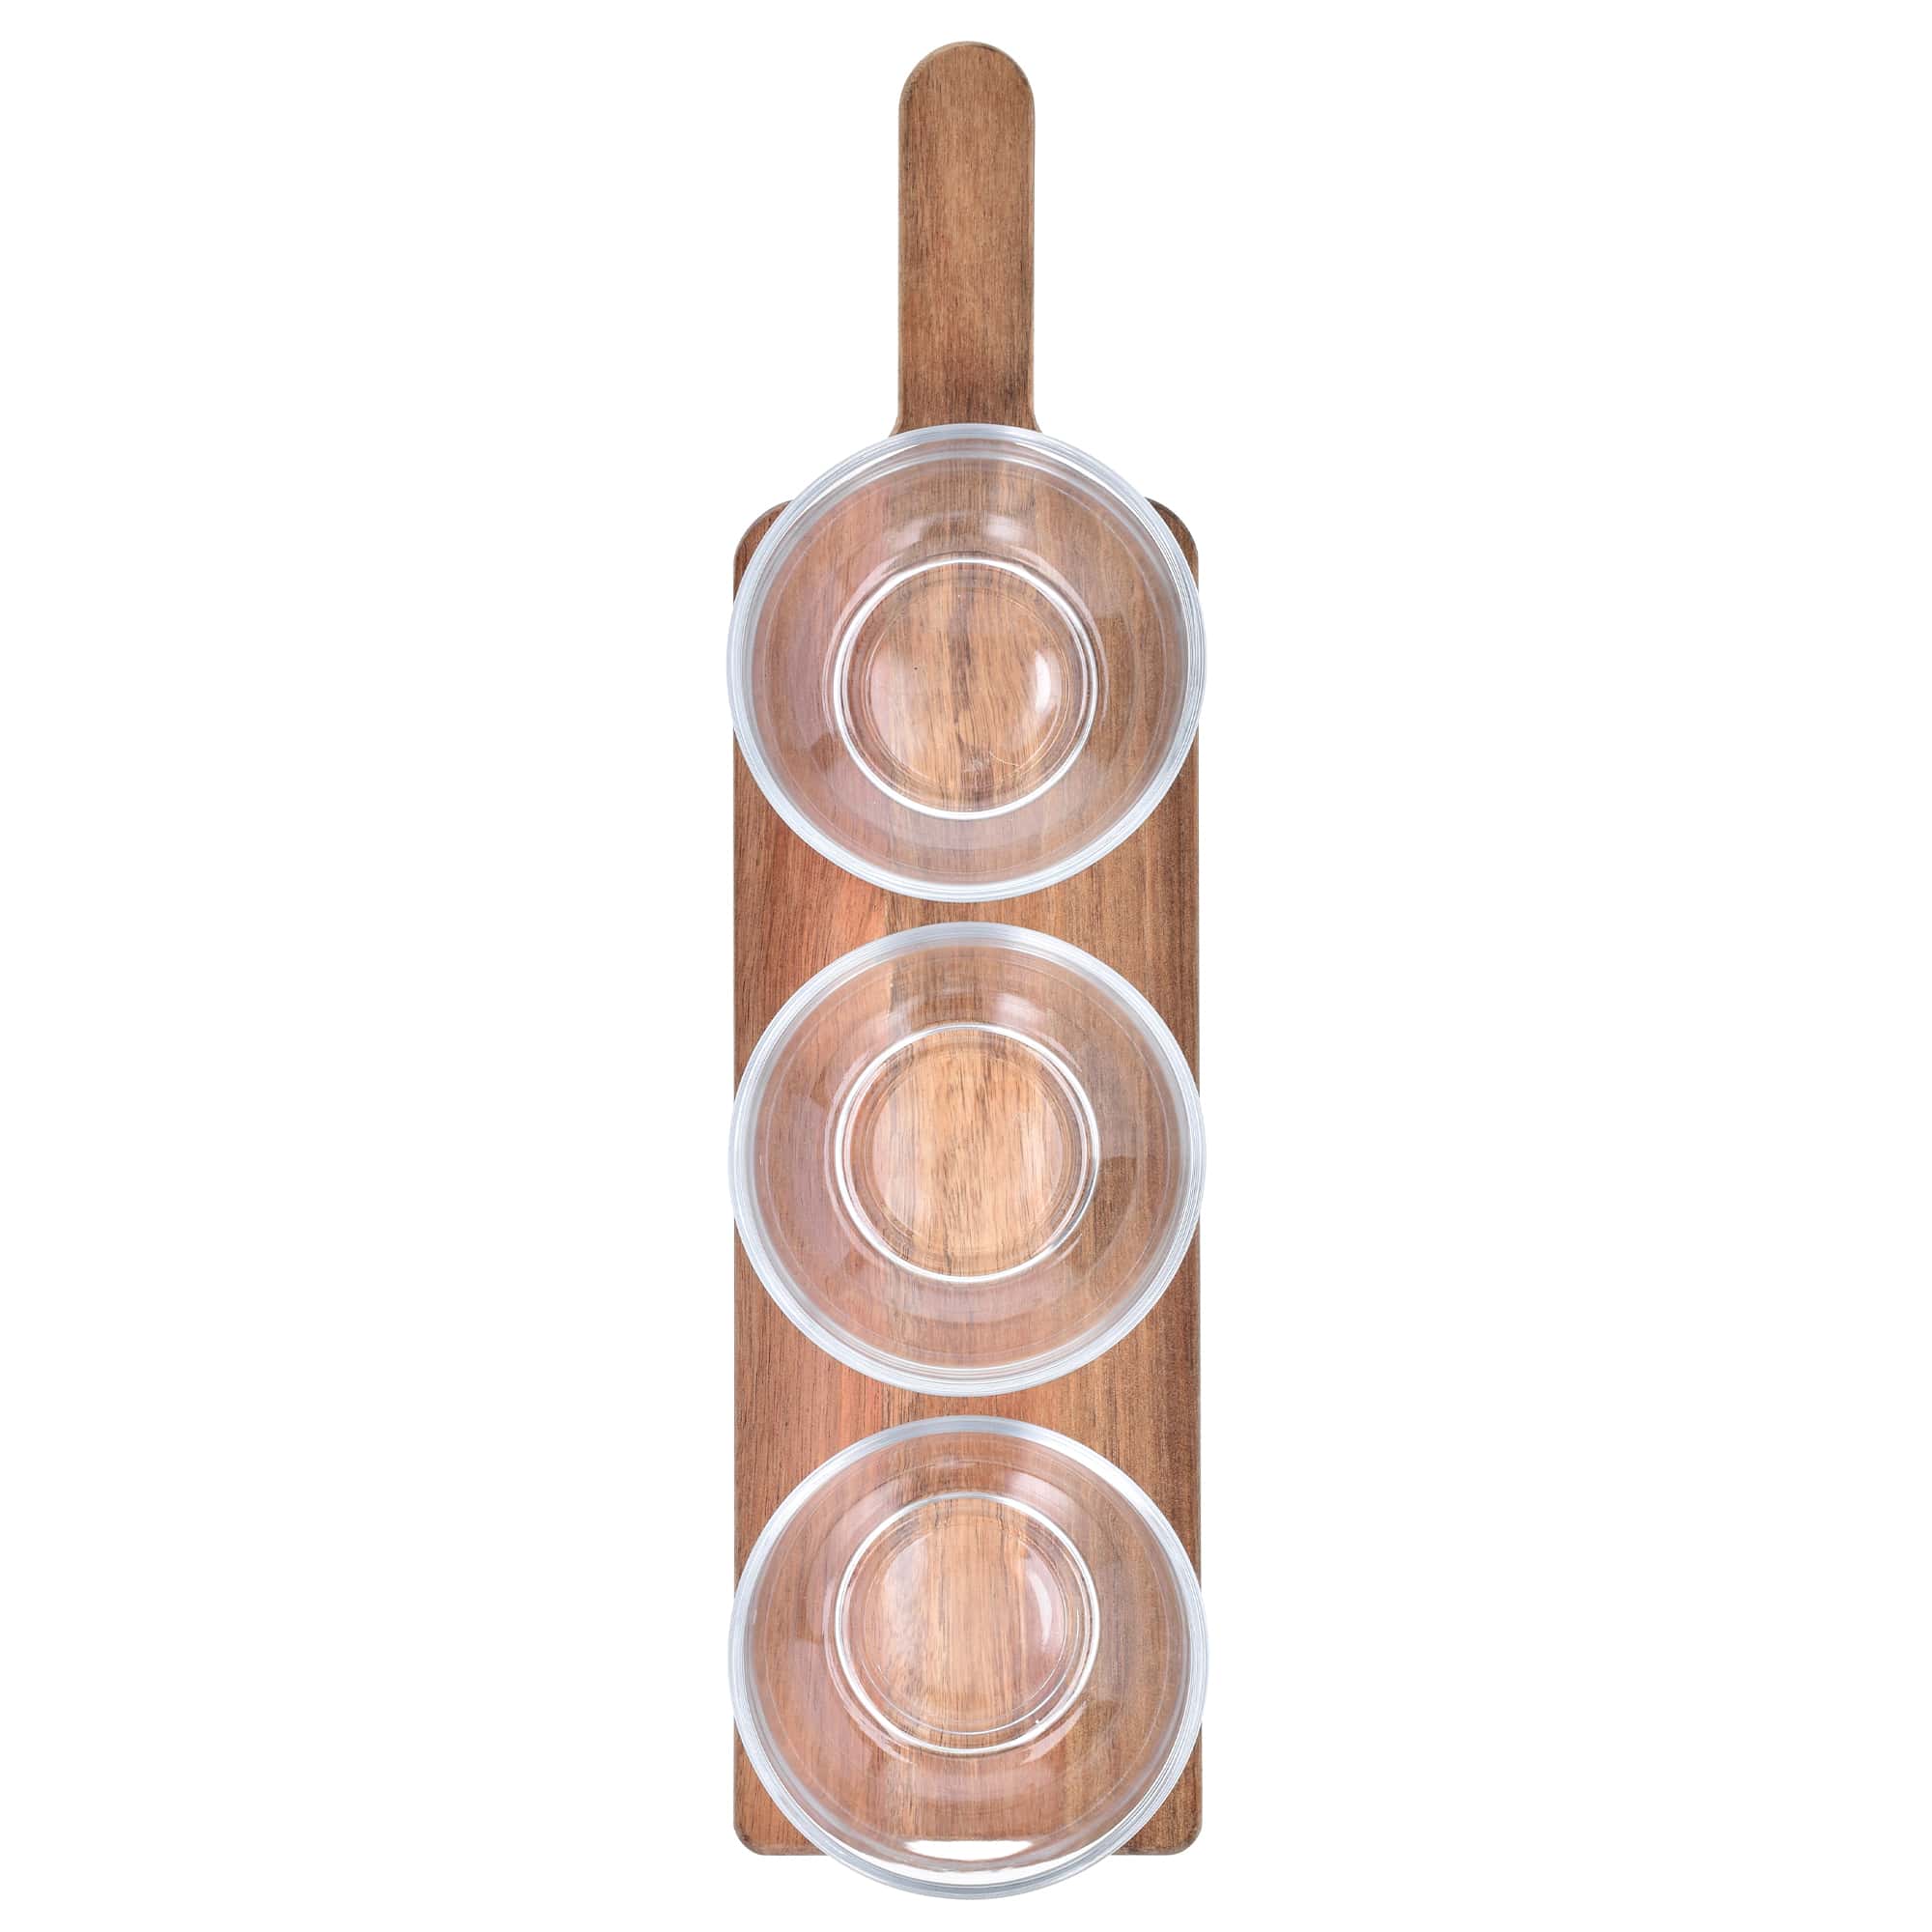 Wooden Flight Tray Paddle Set with Condiment Serving Bowls